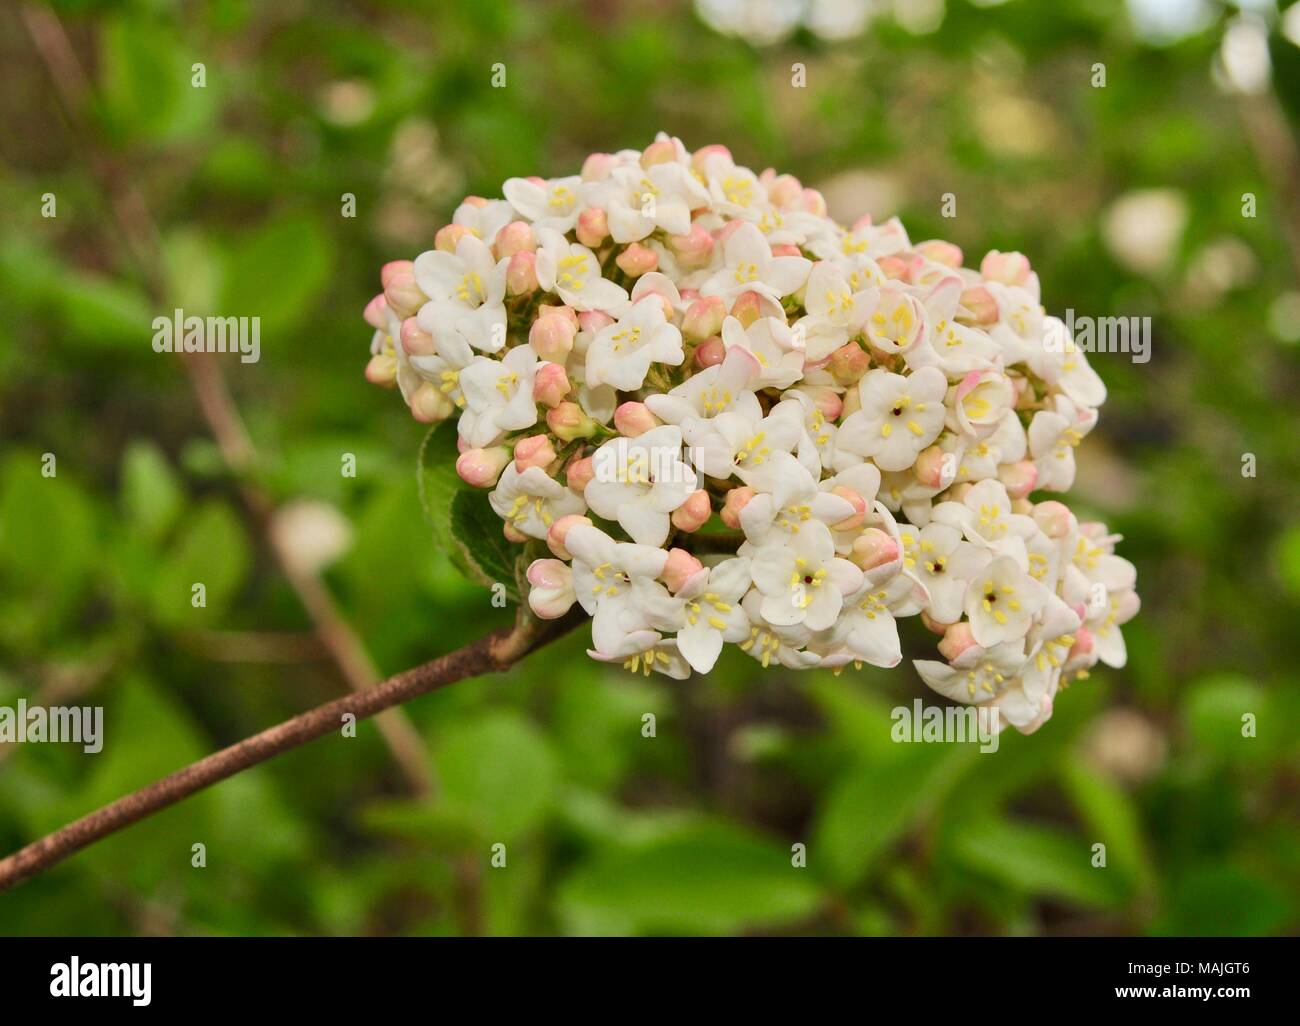 Pink and white flower cluster of a viburnum bush in spring. Stock Photo